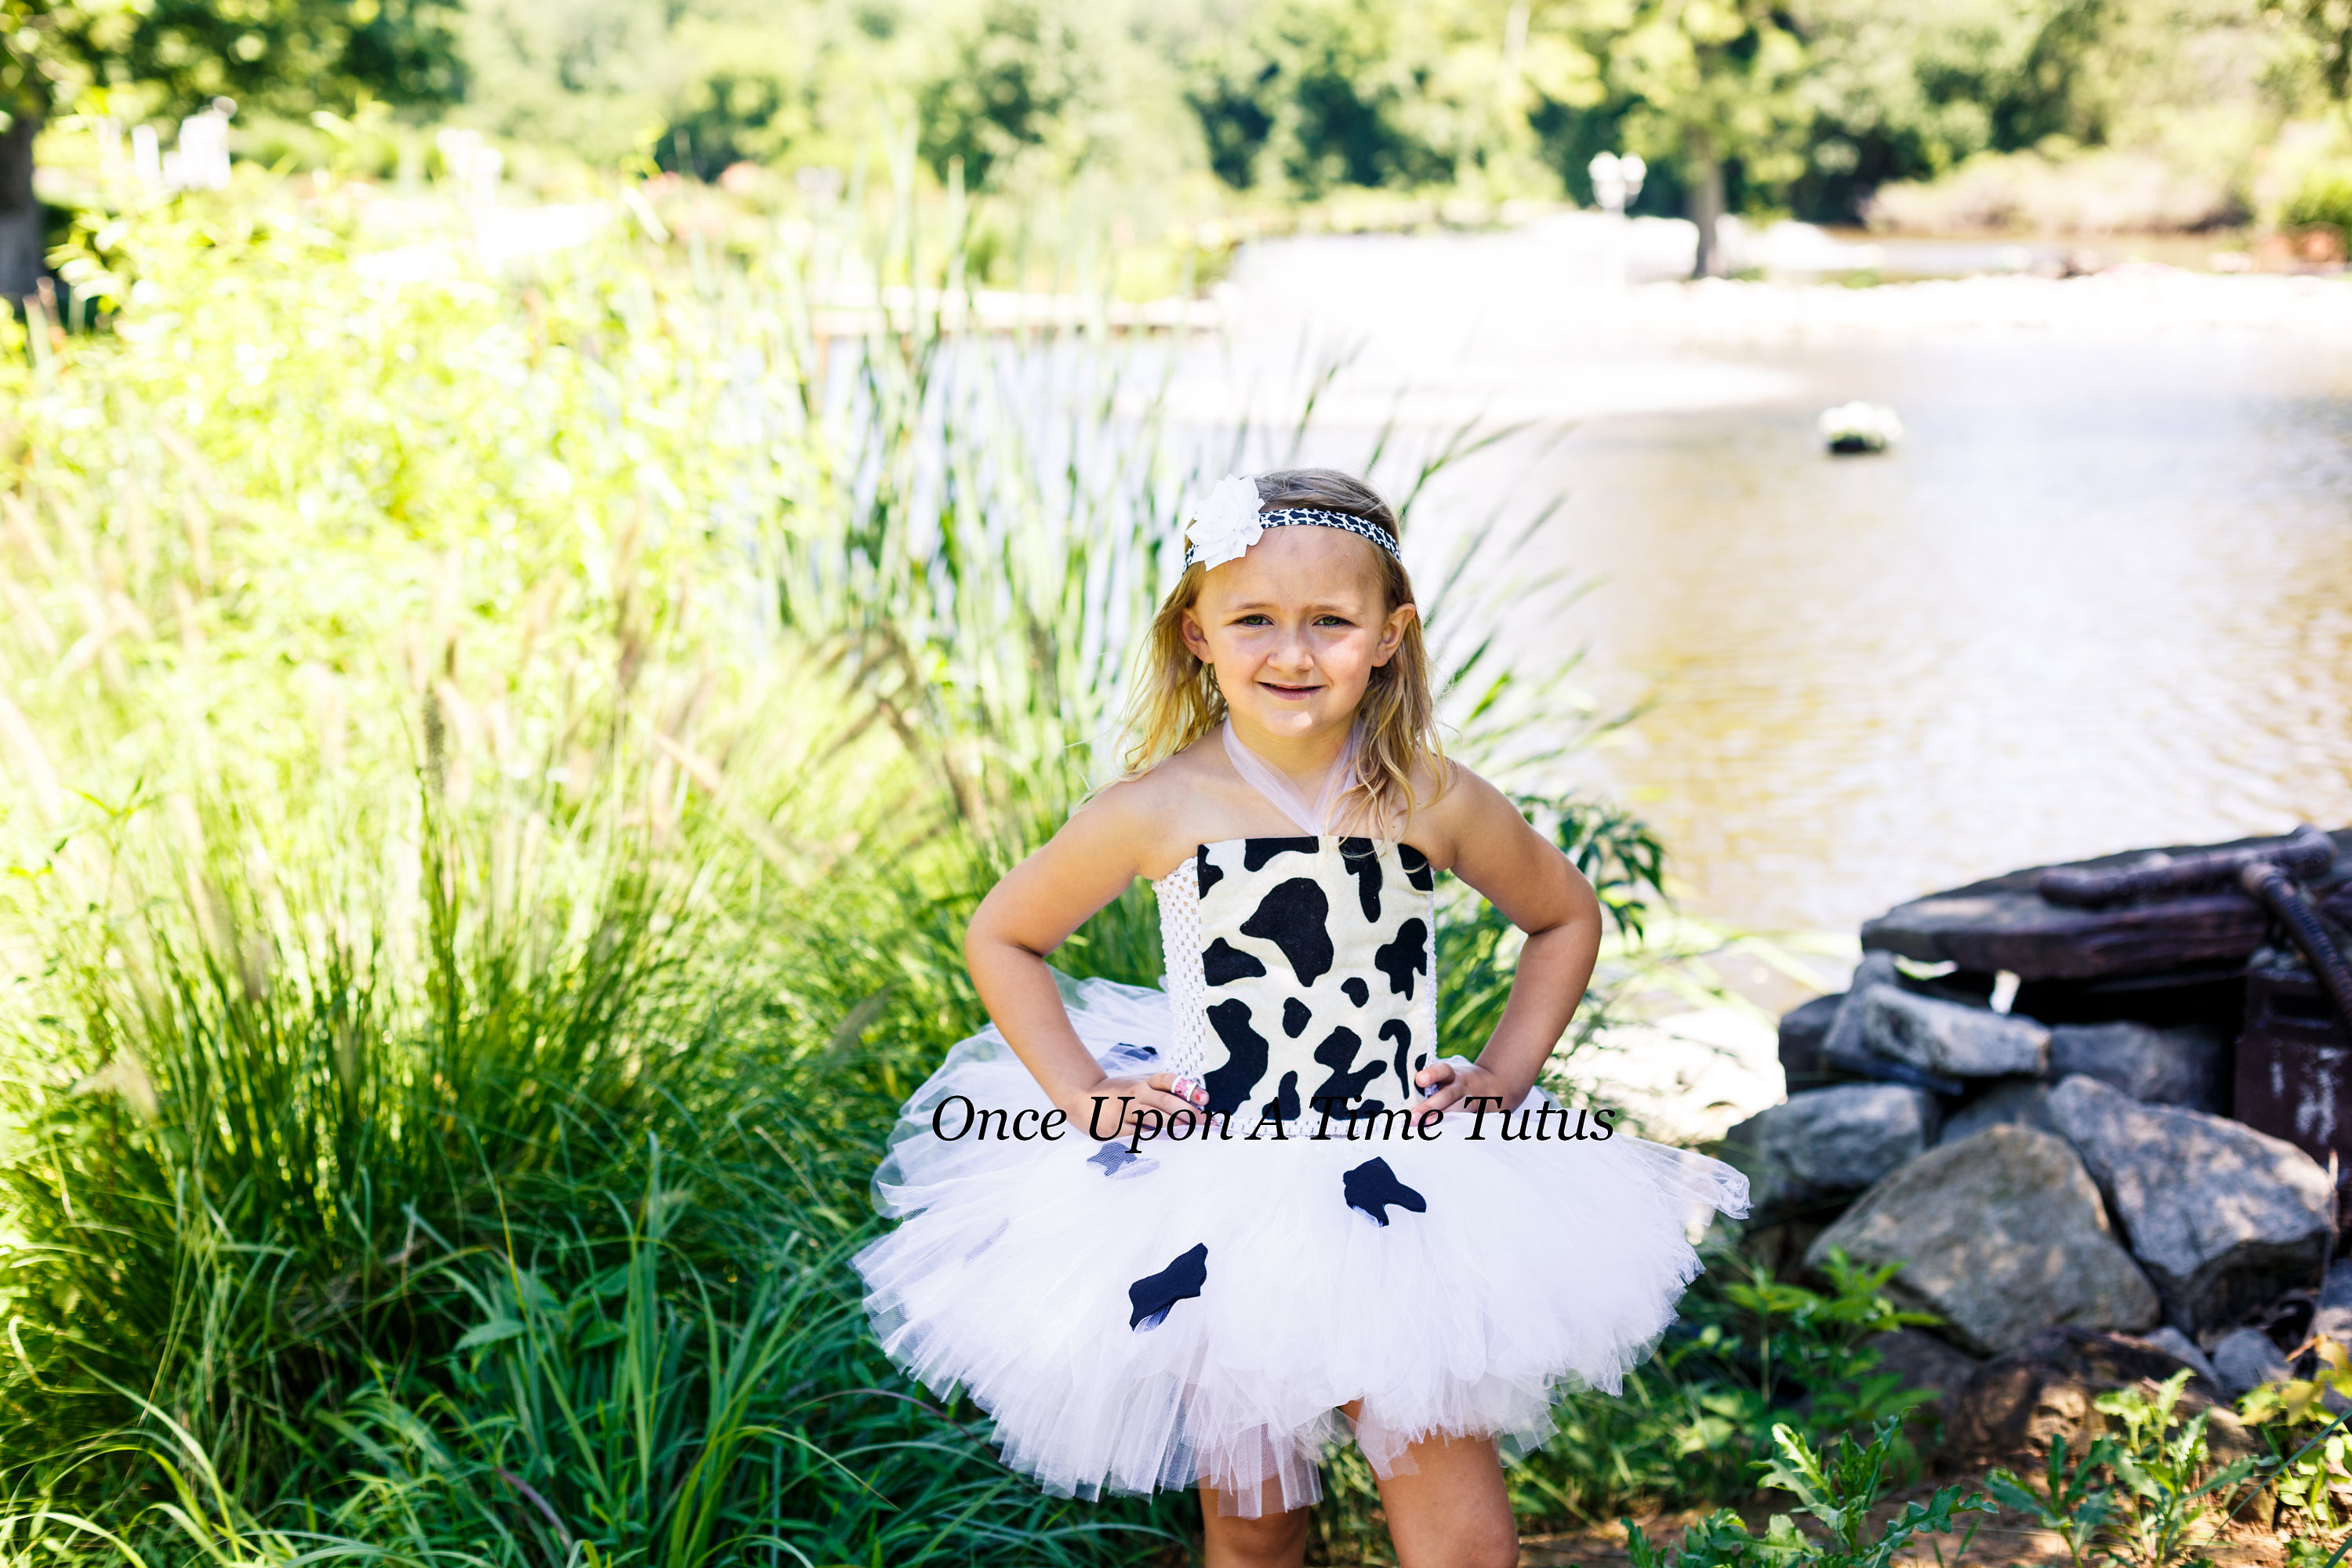 Toddler Cow Costume Size 6-12m